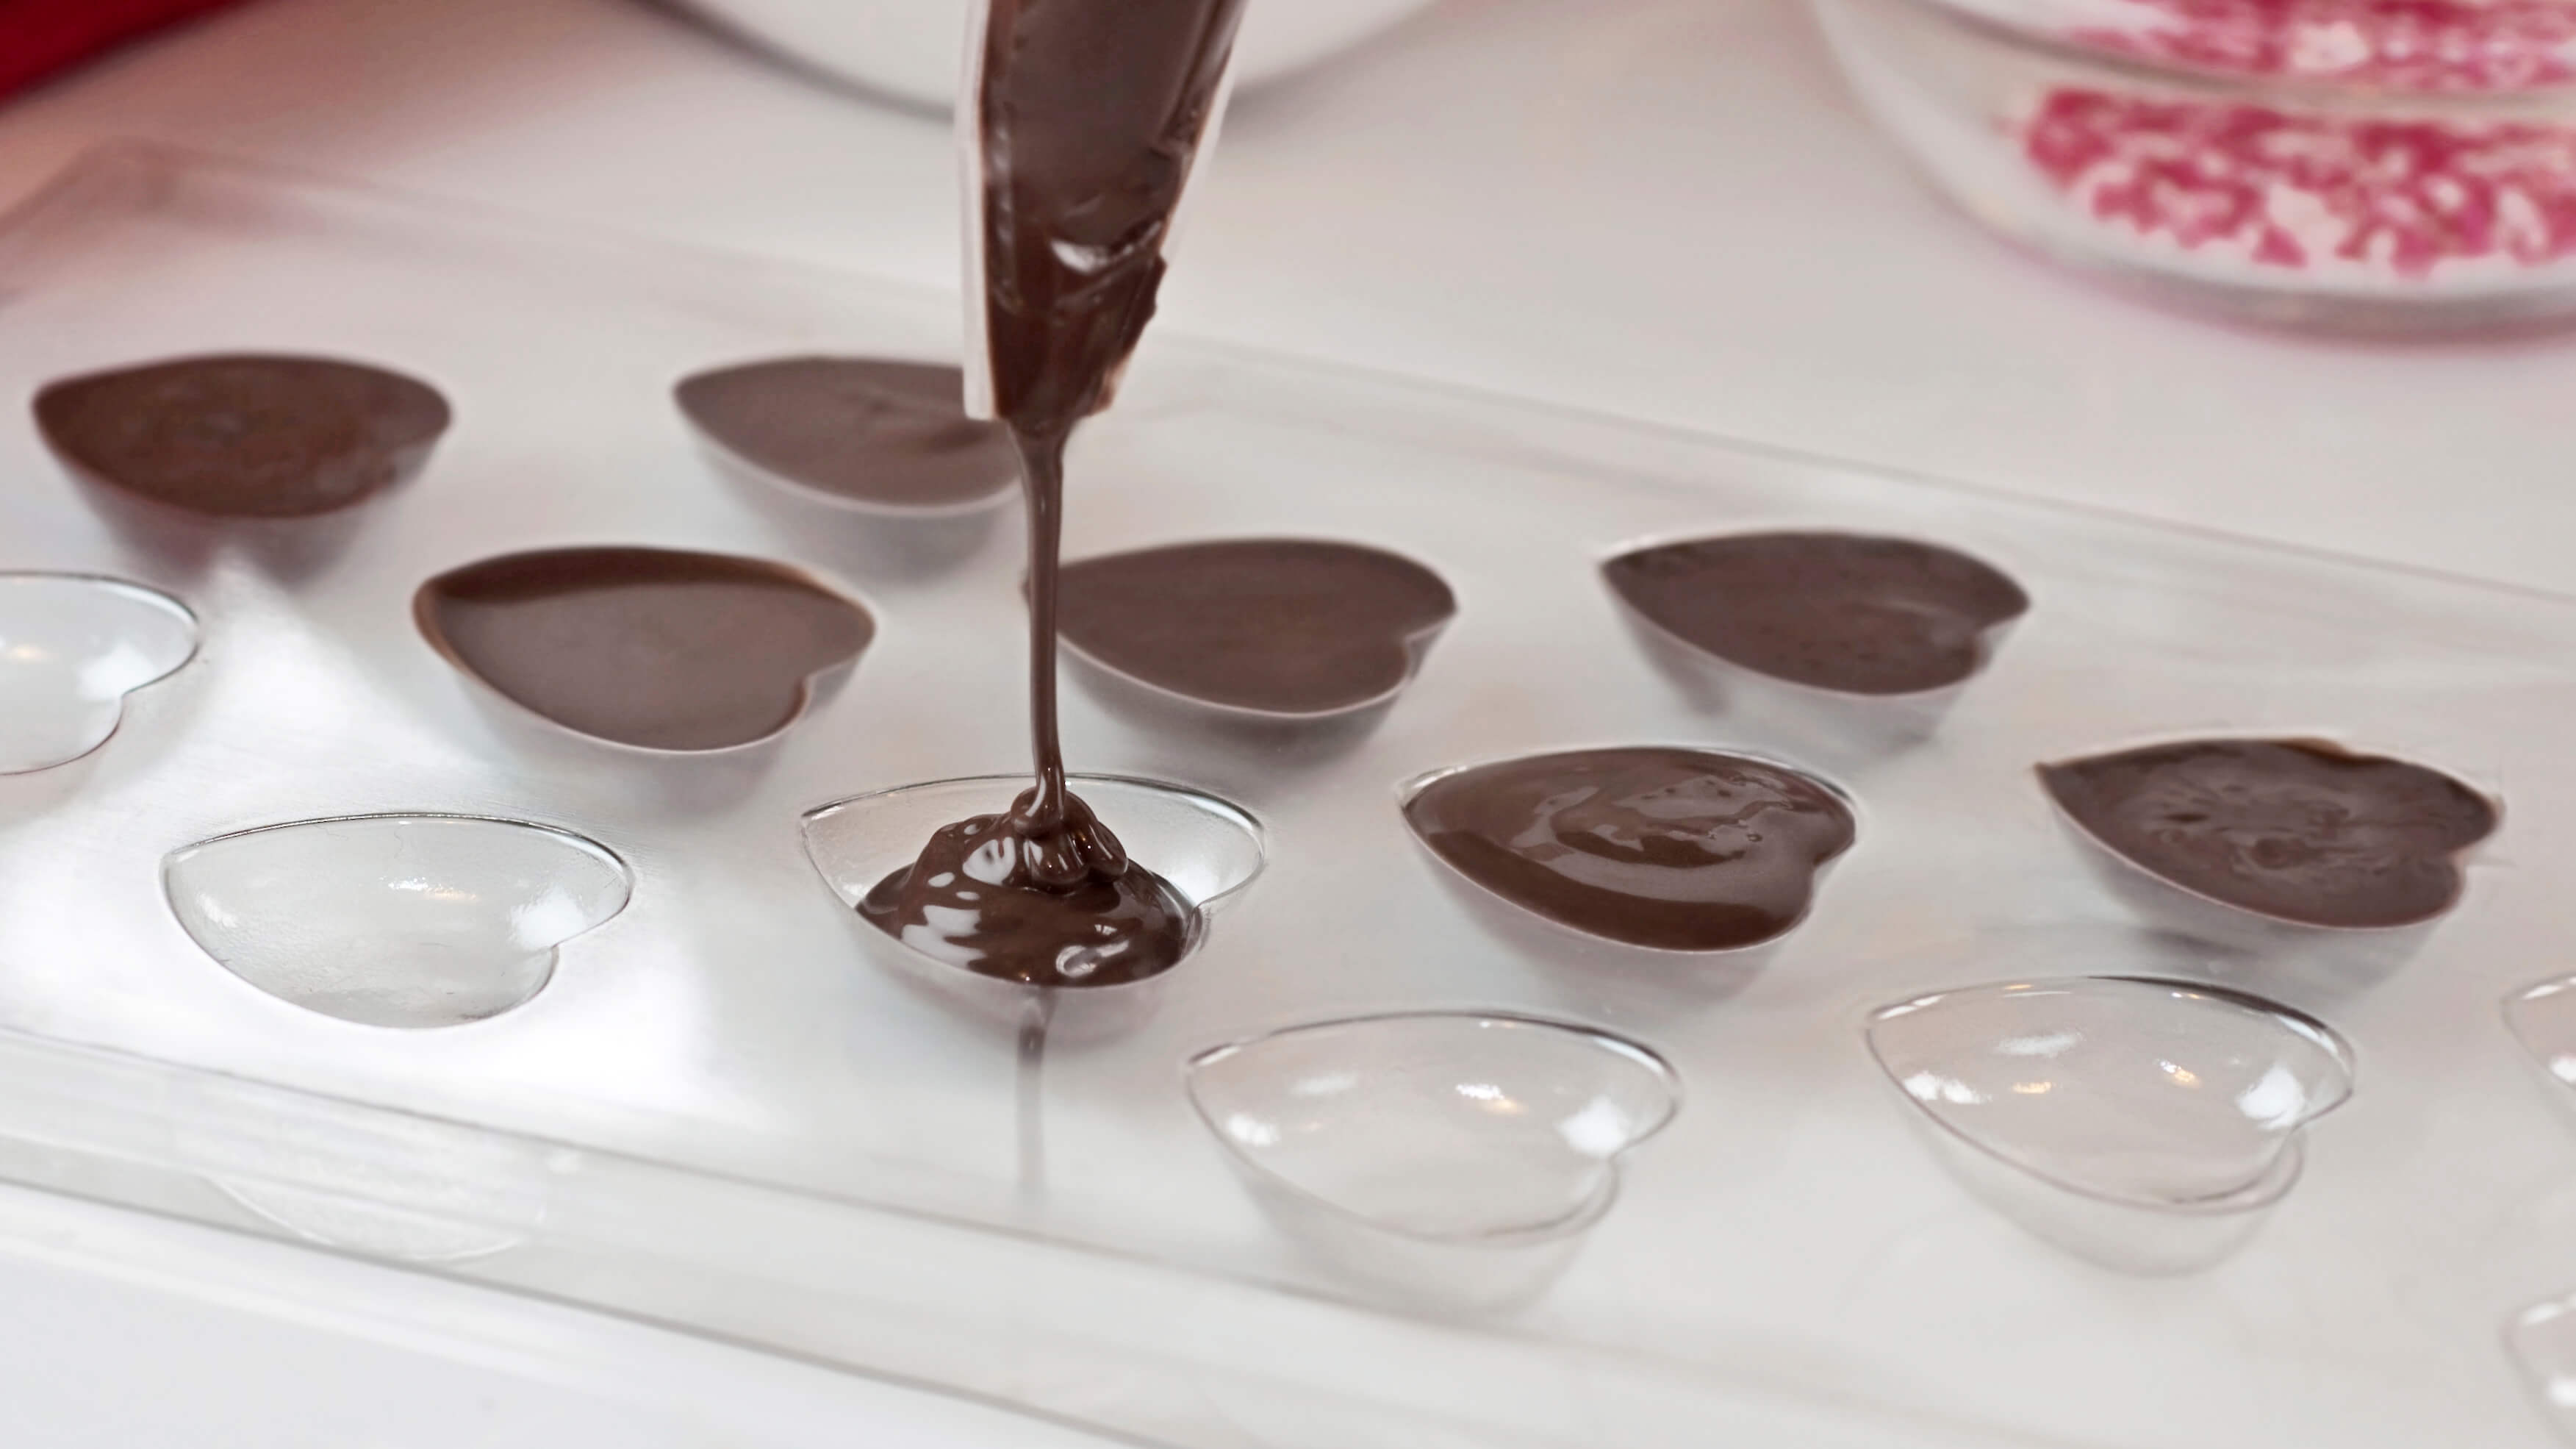 What Chocolate Do You Use for Molds? 